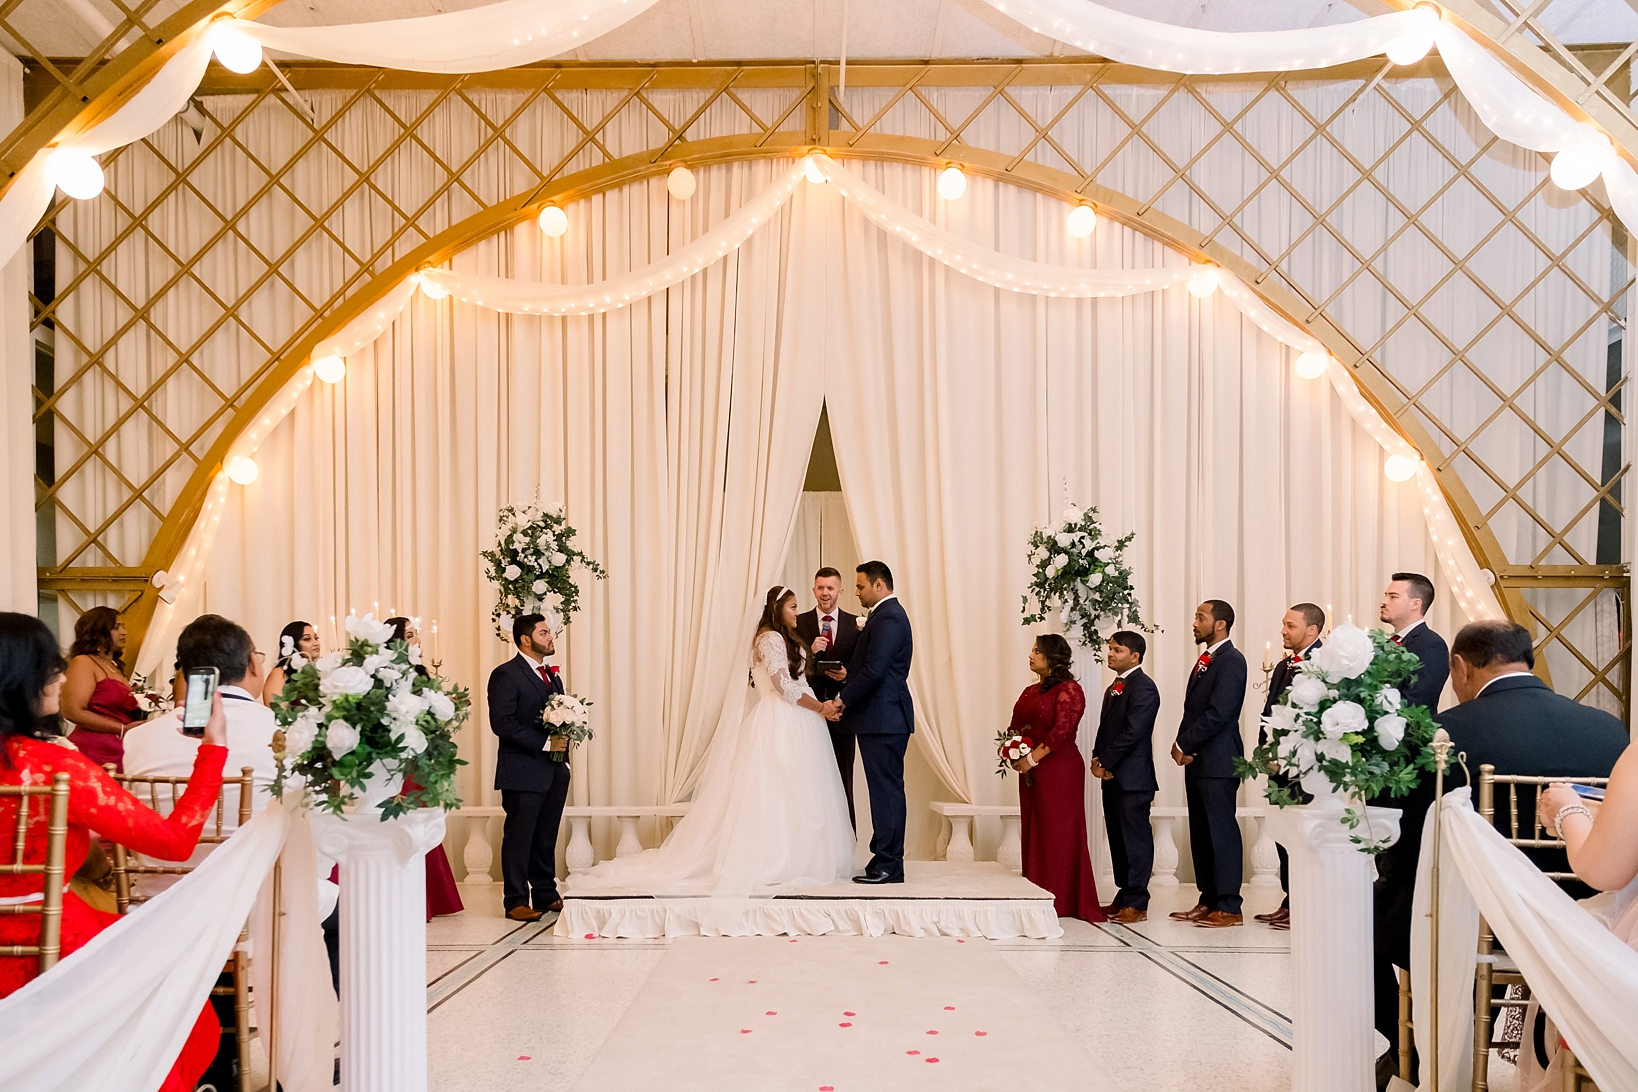 The bride and groom framed by the gold arches of the Kapok Tree's ceremony space by Sarah & Ben Photography